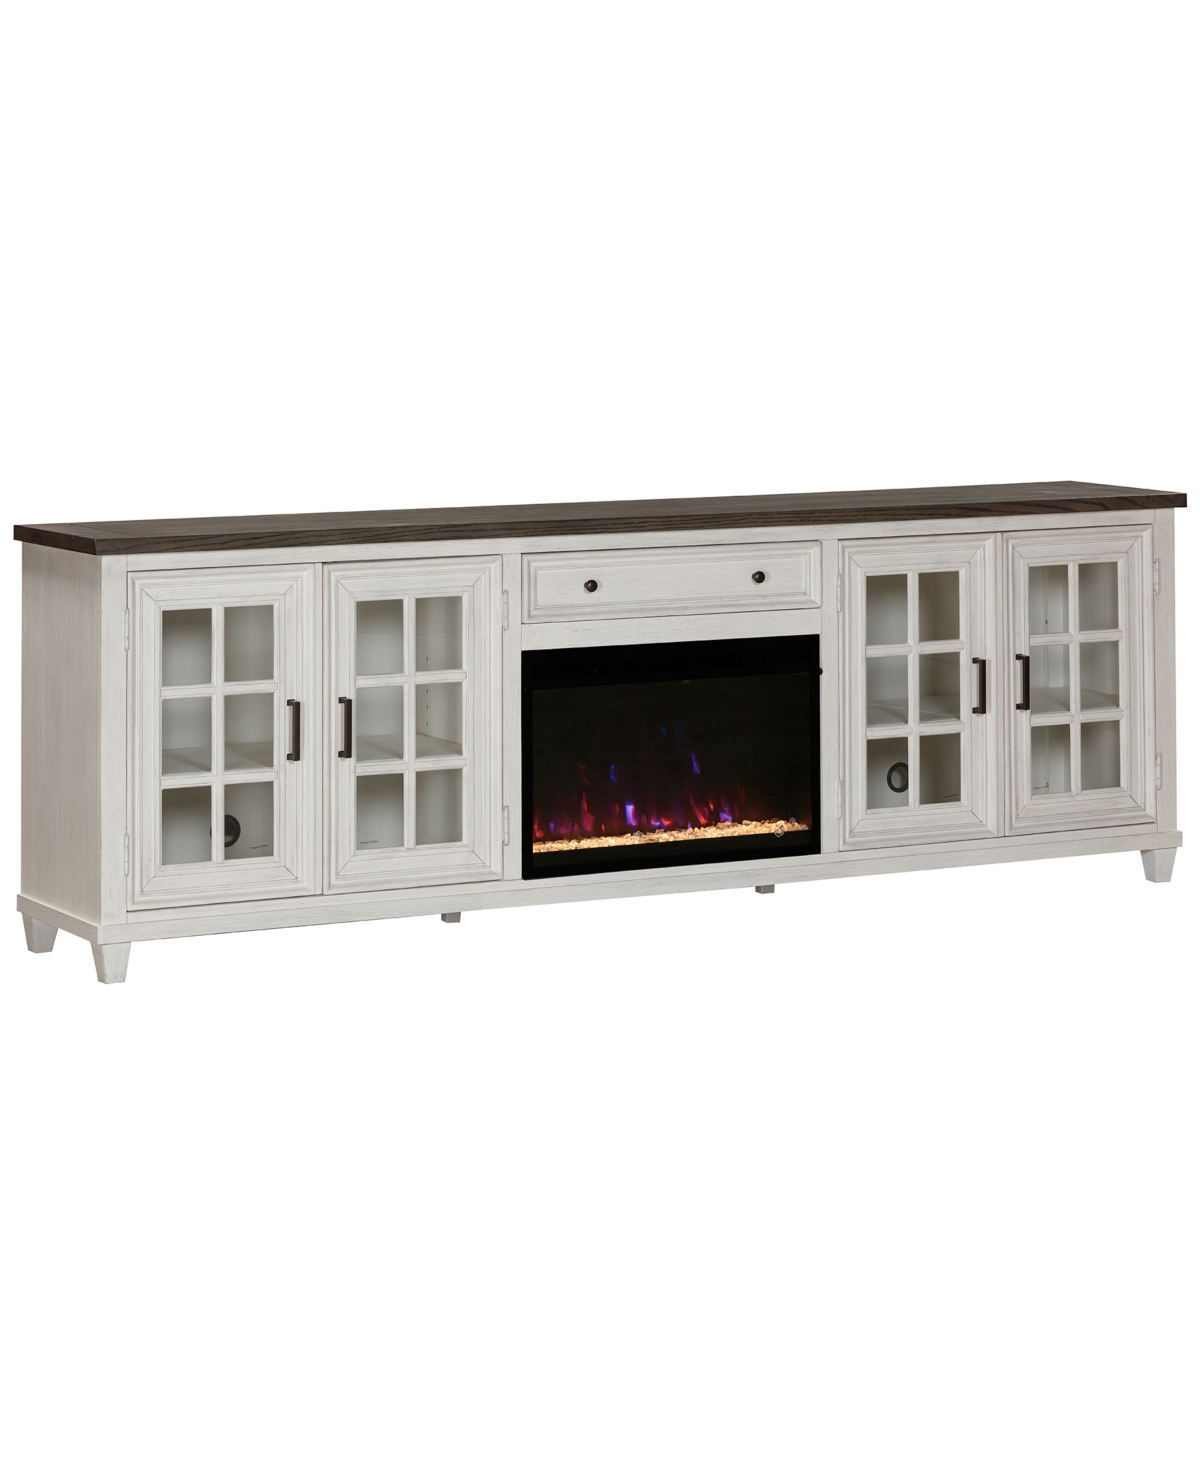 Macy's 96" Dawnwood 2pc Tv Console Set (96" Console And Fireplace) In White